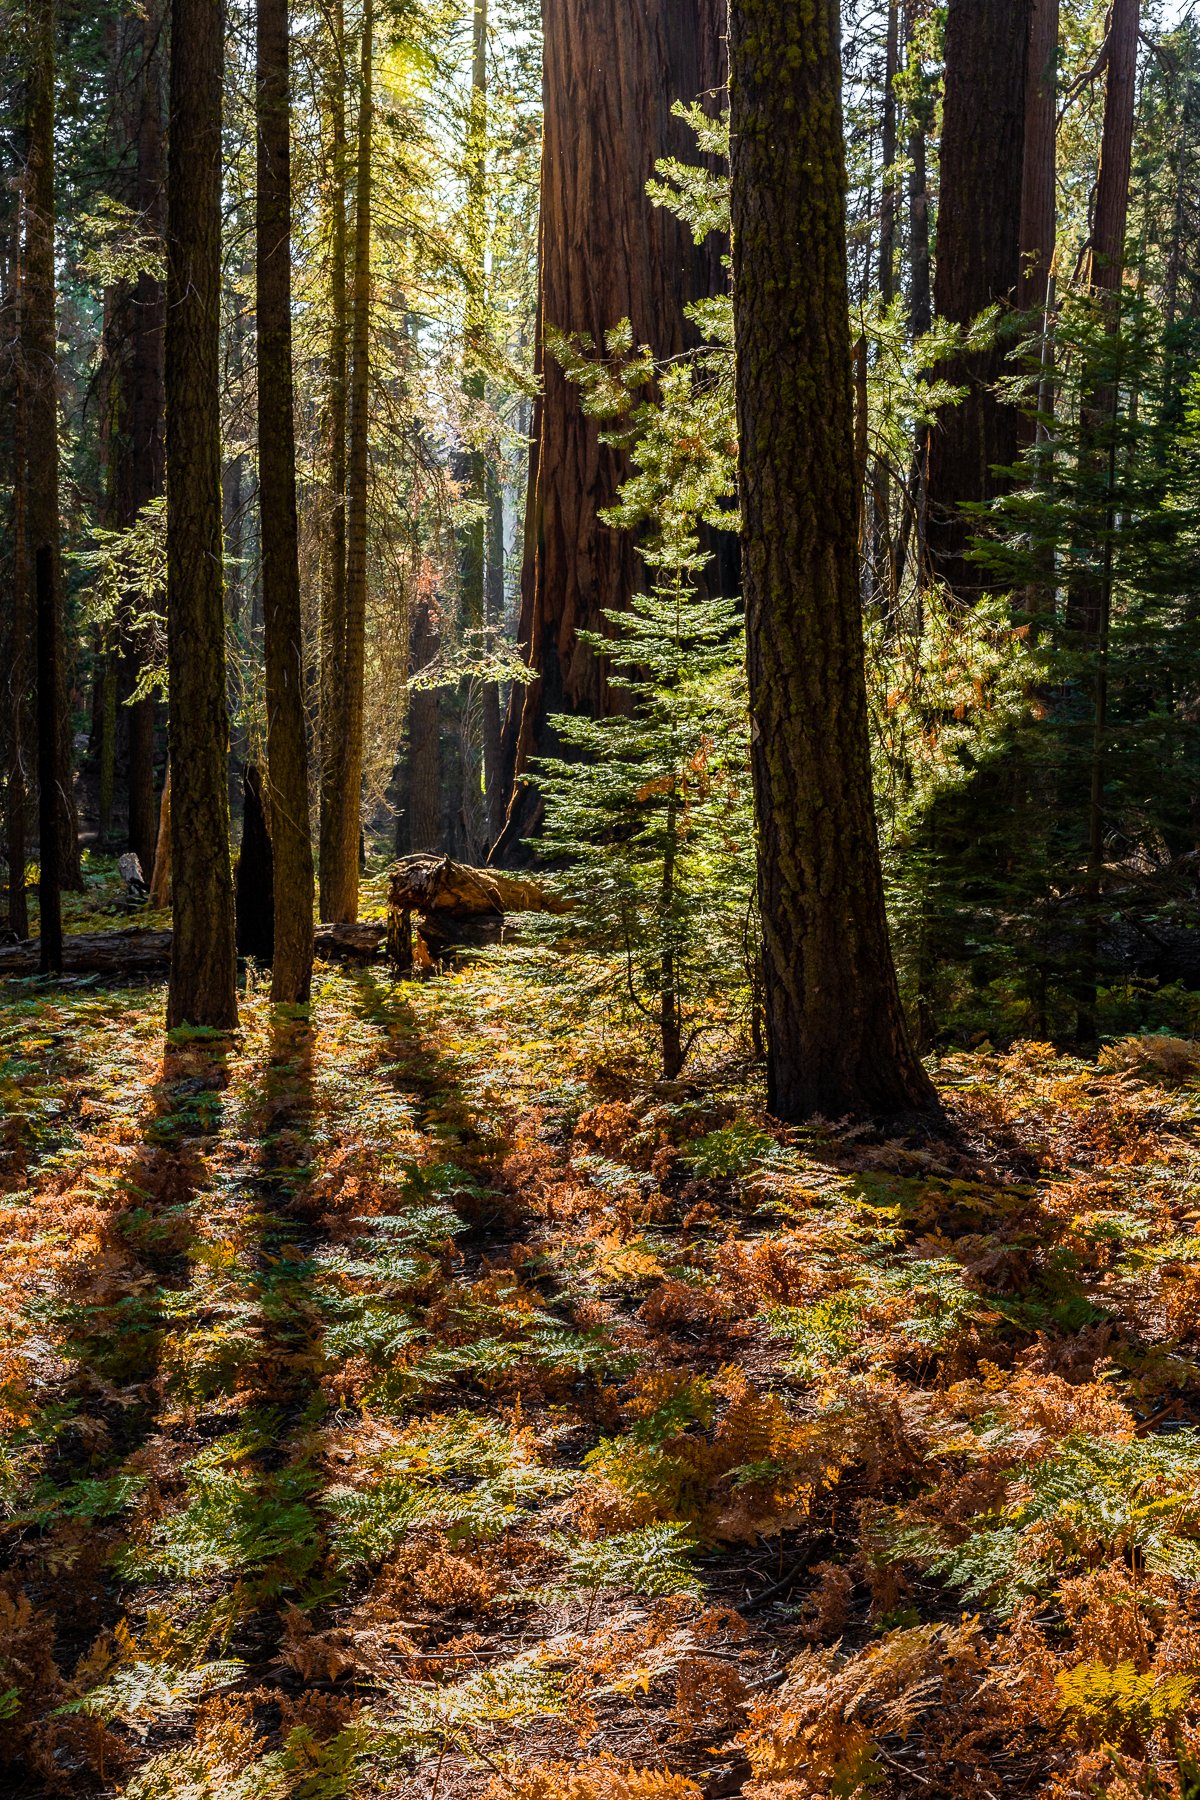 crescent-meadow-trail-loop-sequoia-national-park-trees-afternoon-light-ferns-undergrowth-foreground-forest-floor.jpg